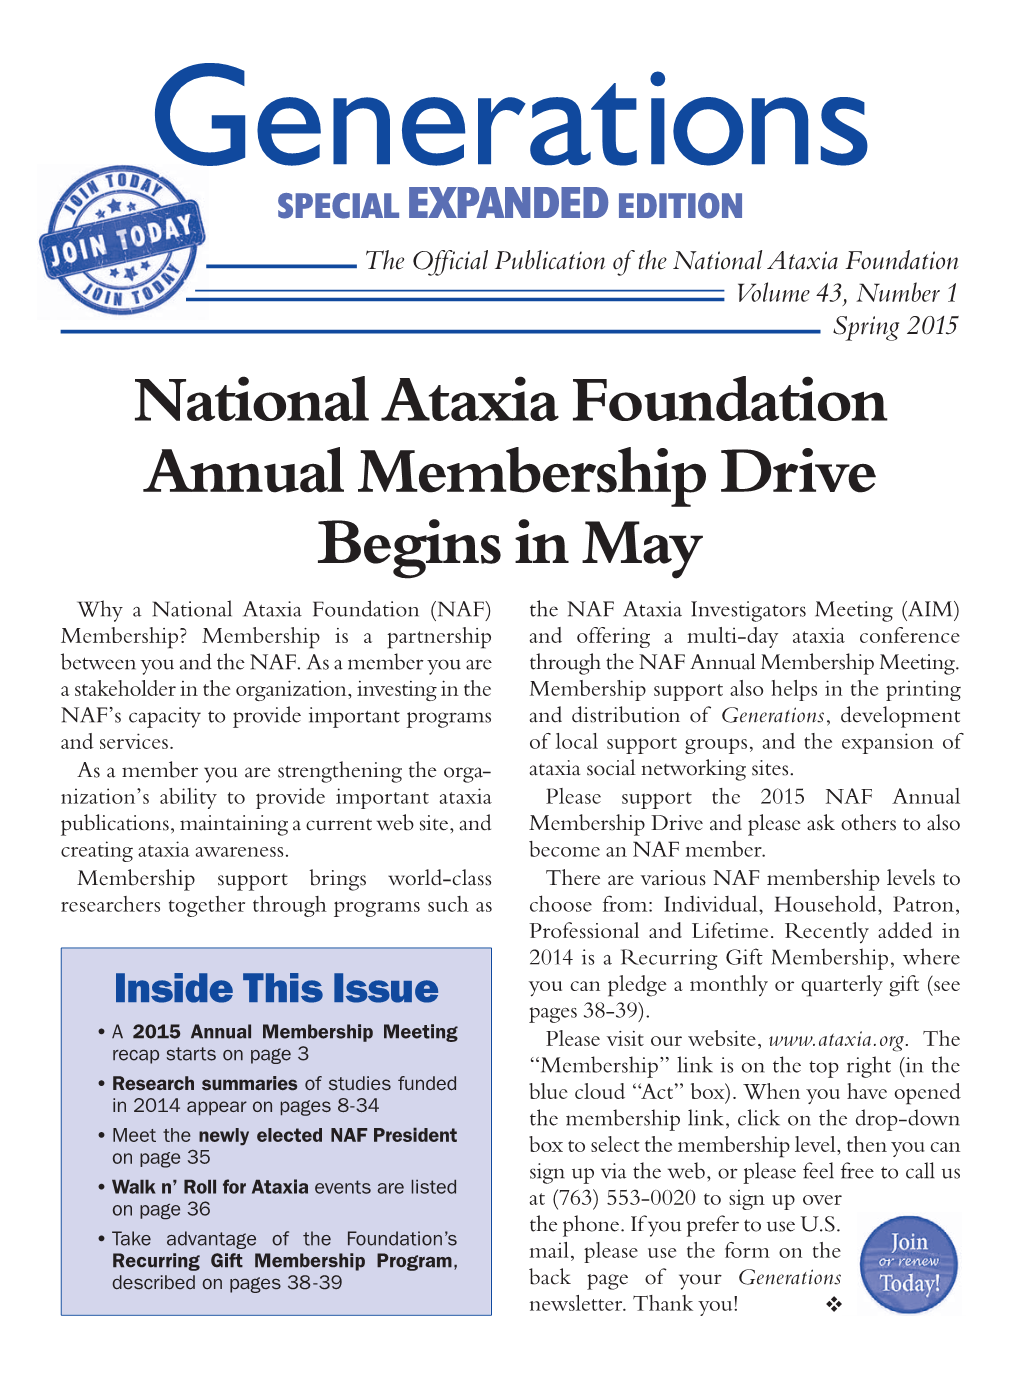 National Ataxia Foundation Annual Membership Drive Begins in May